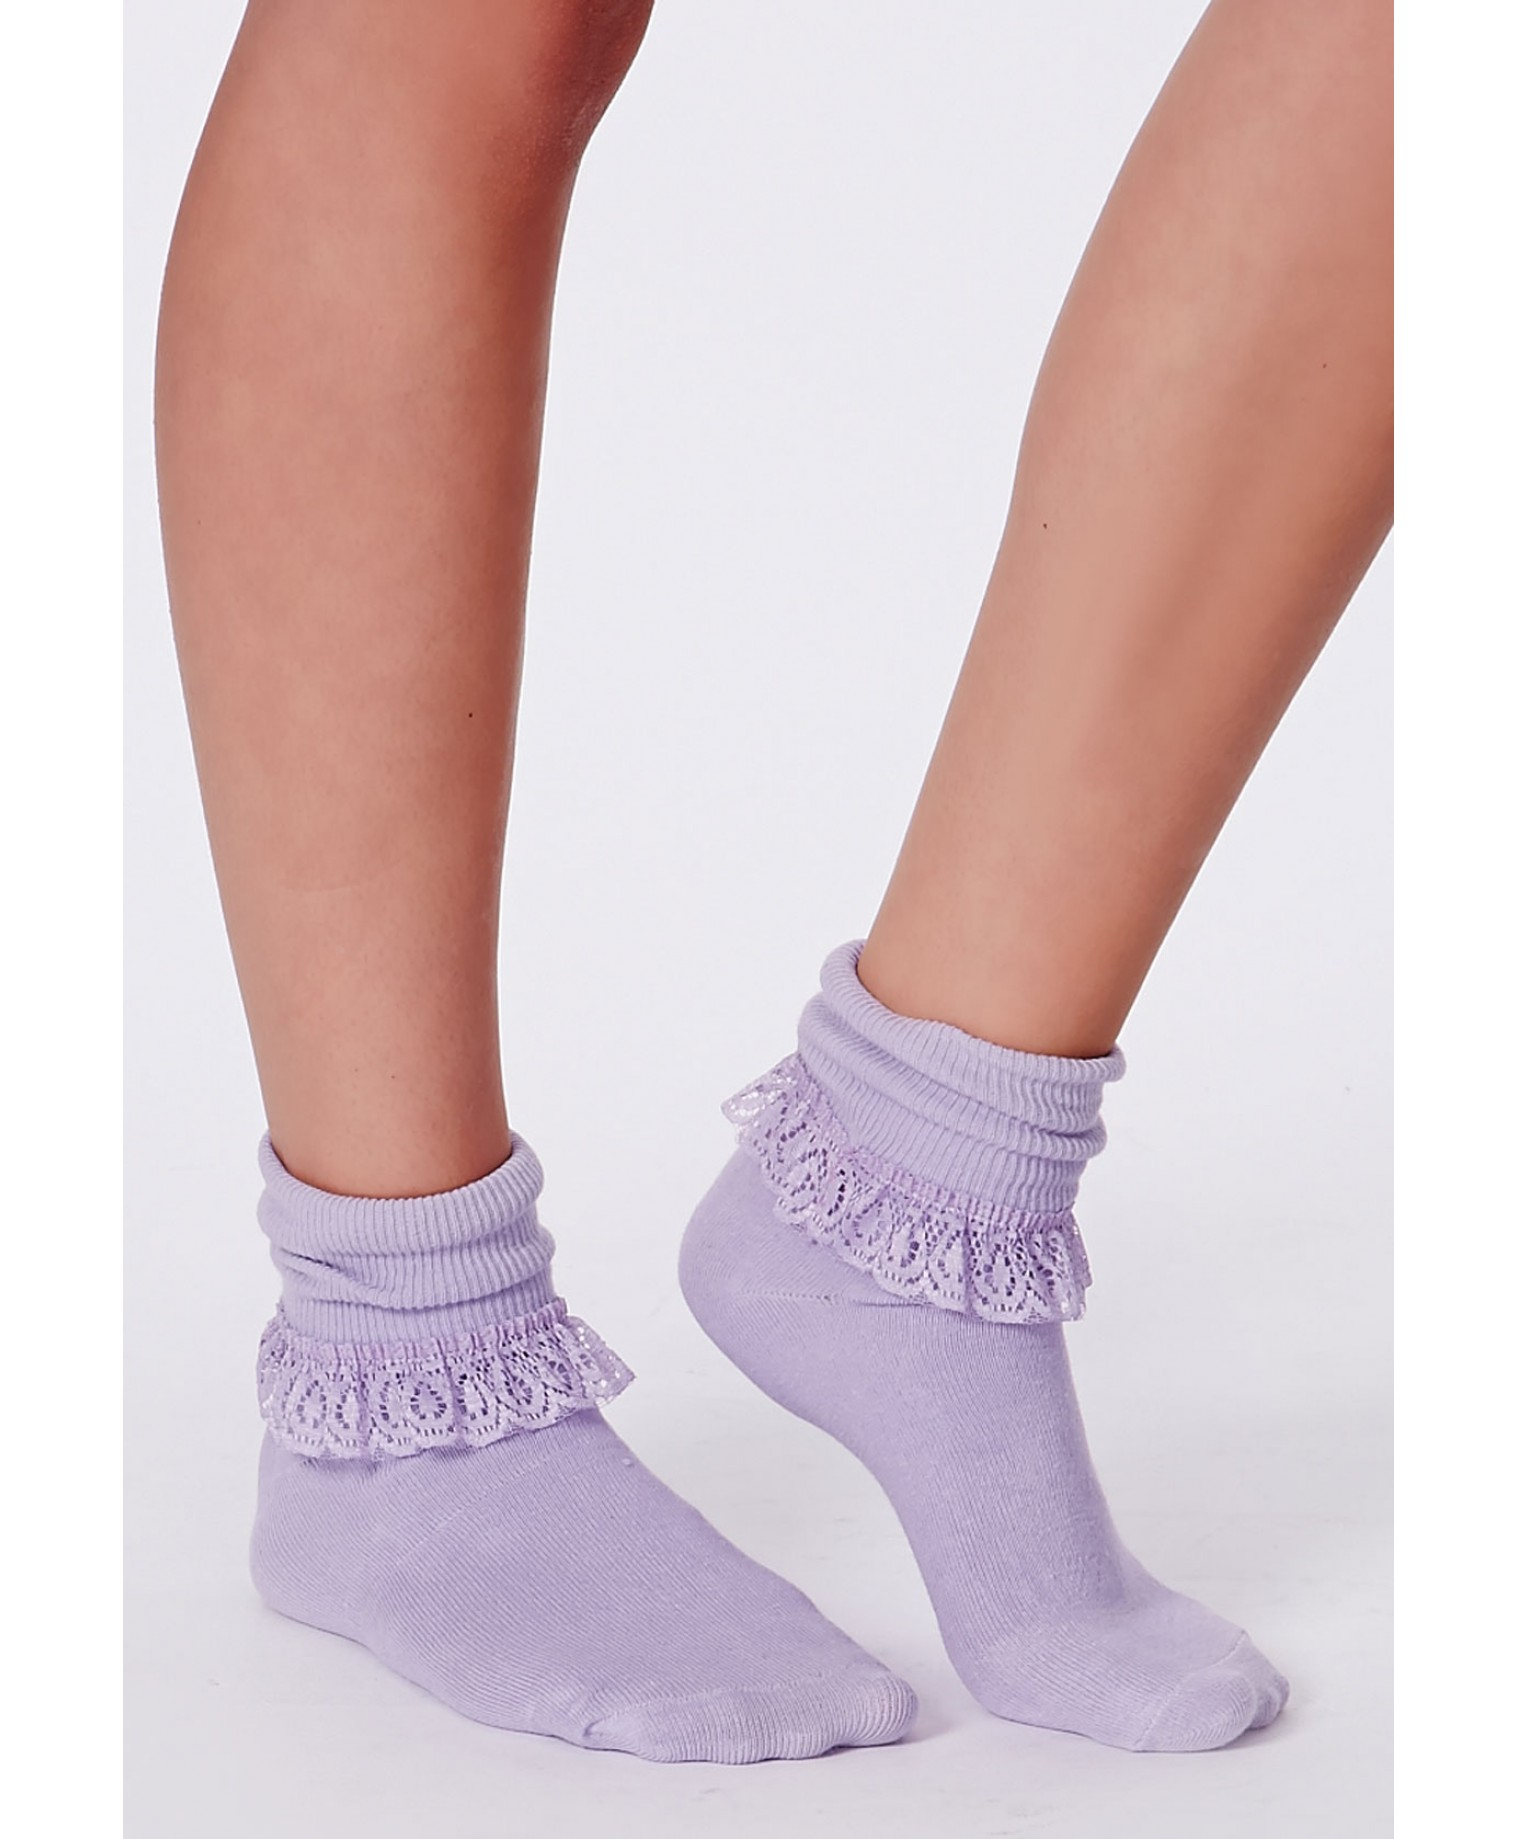 Missguided Marotta Lilac Lace Frill Ankle Socks in Purple - Lyst